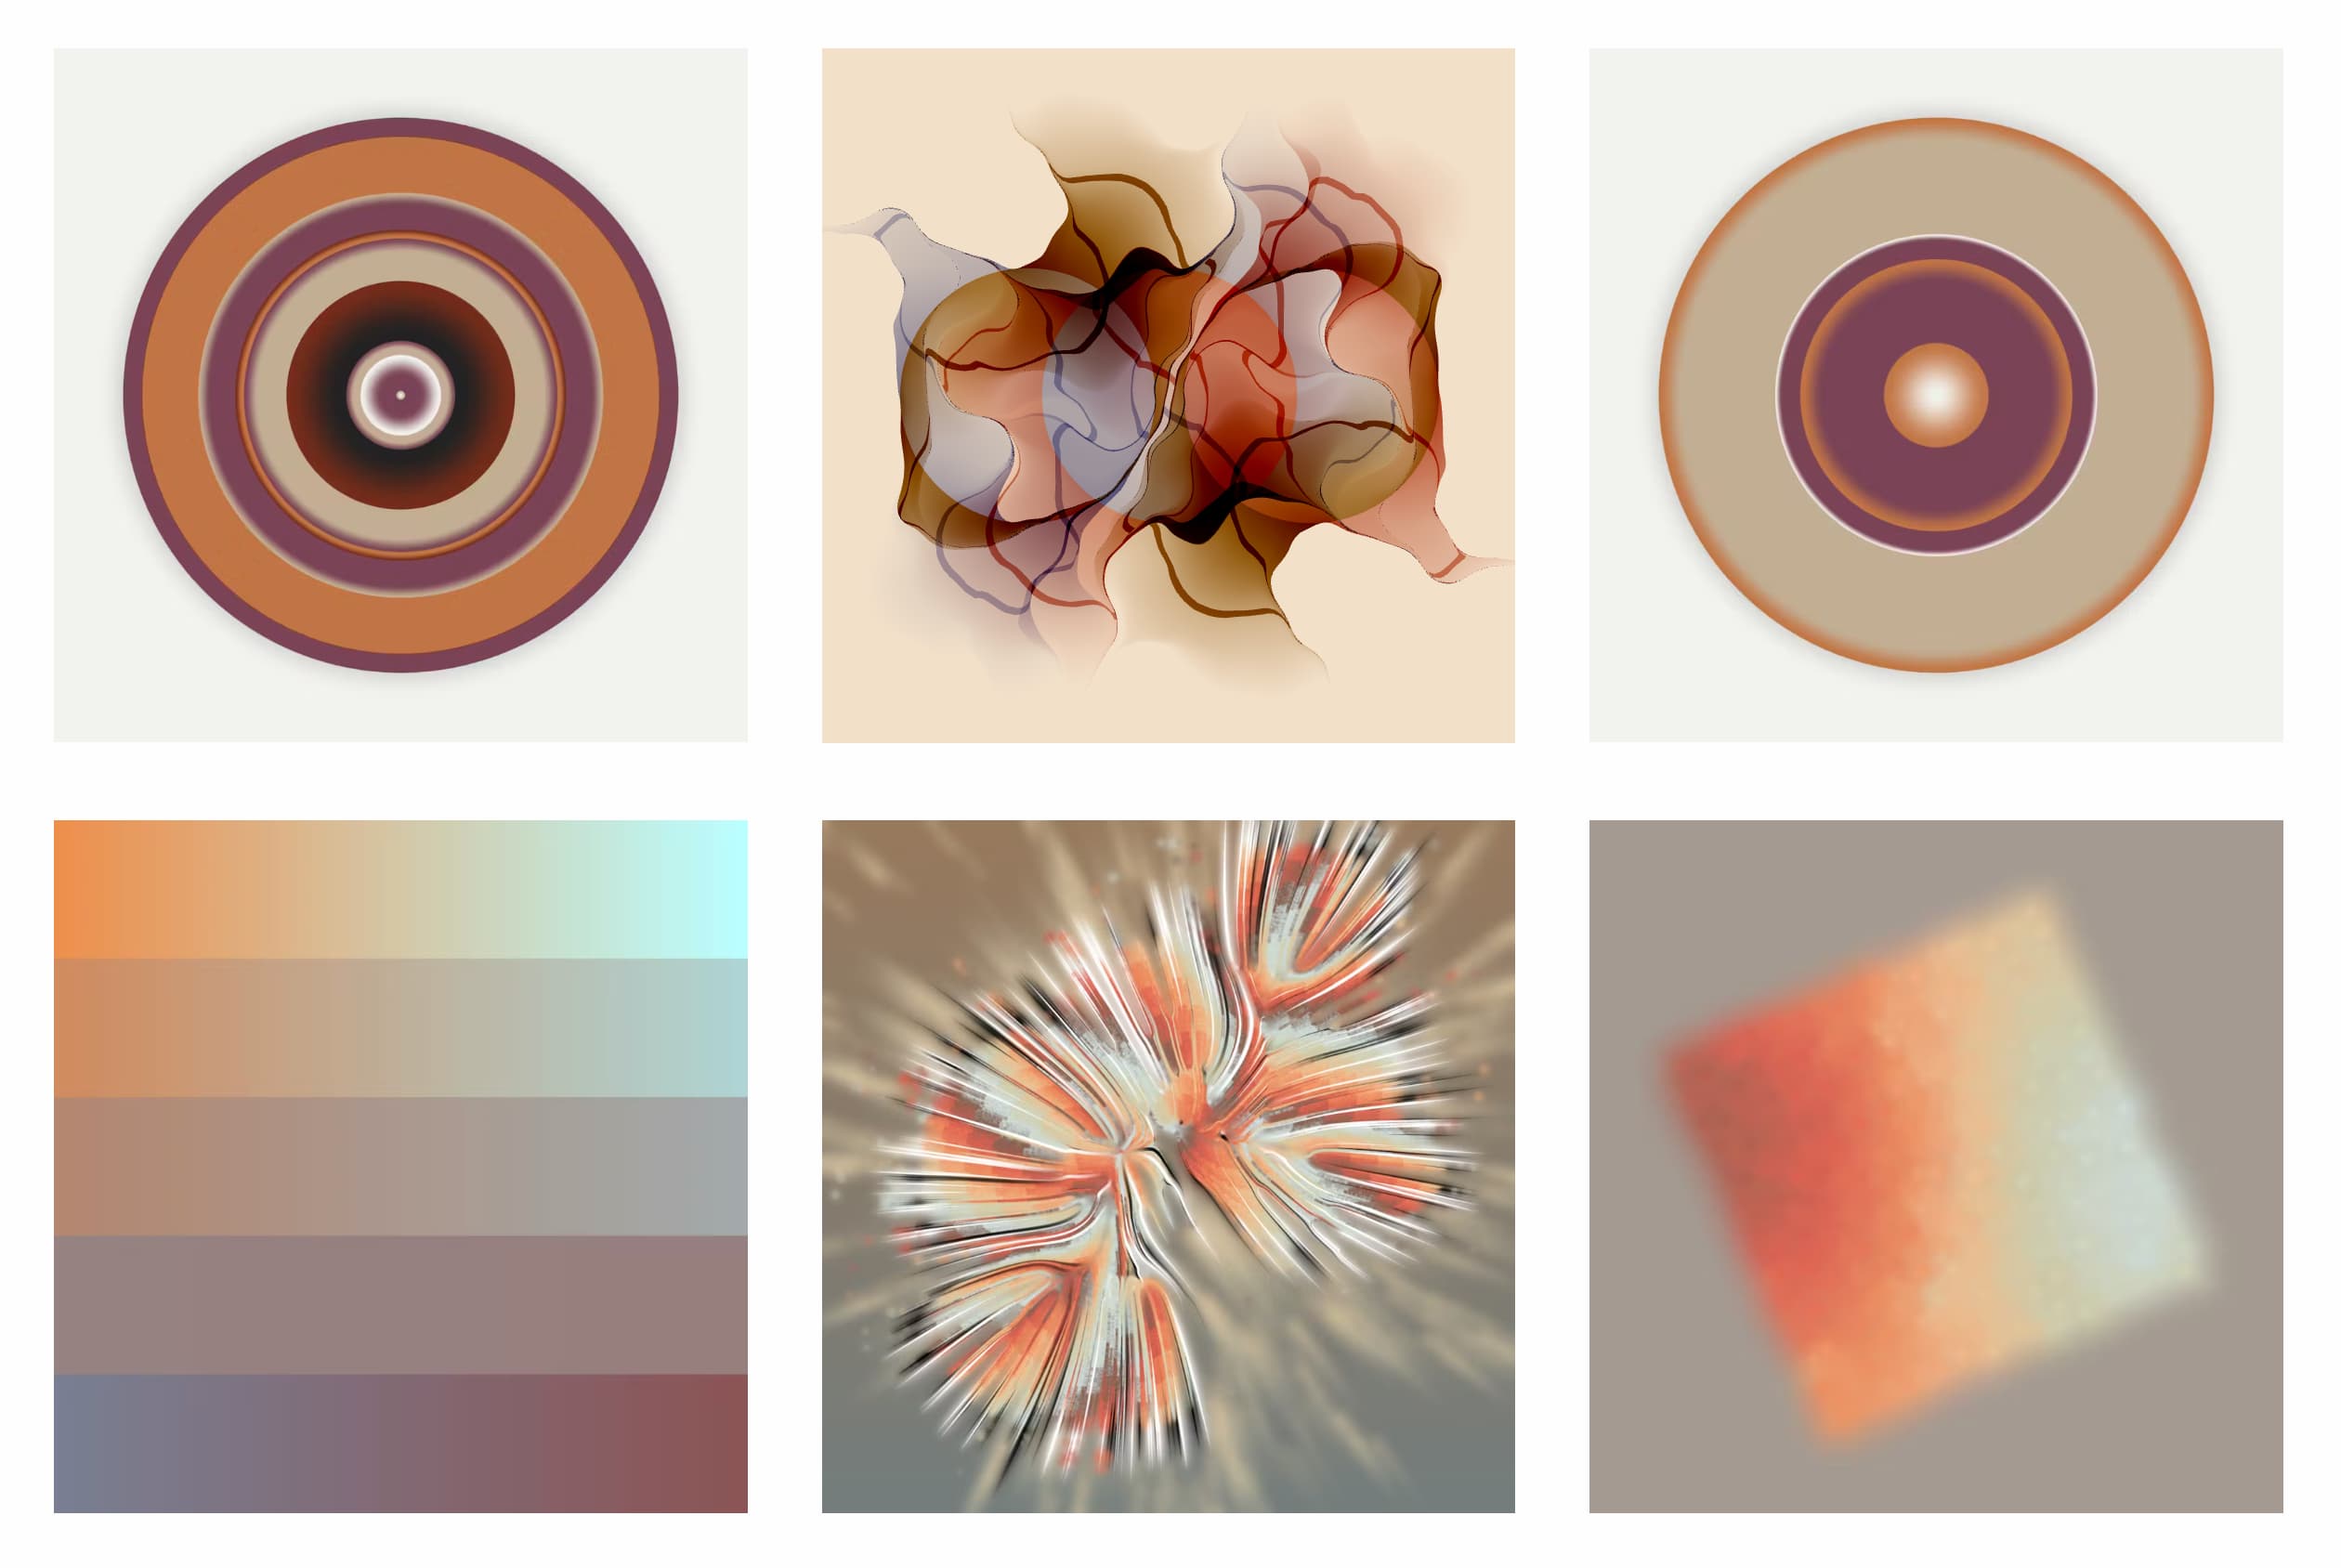 Six works of digital art, all in muted tones with touches of iridescence, arranged in two rows